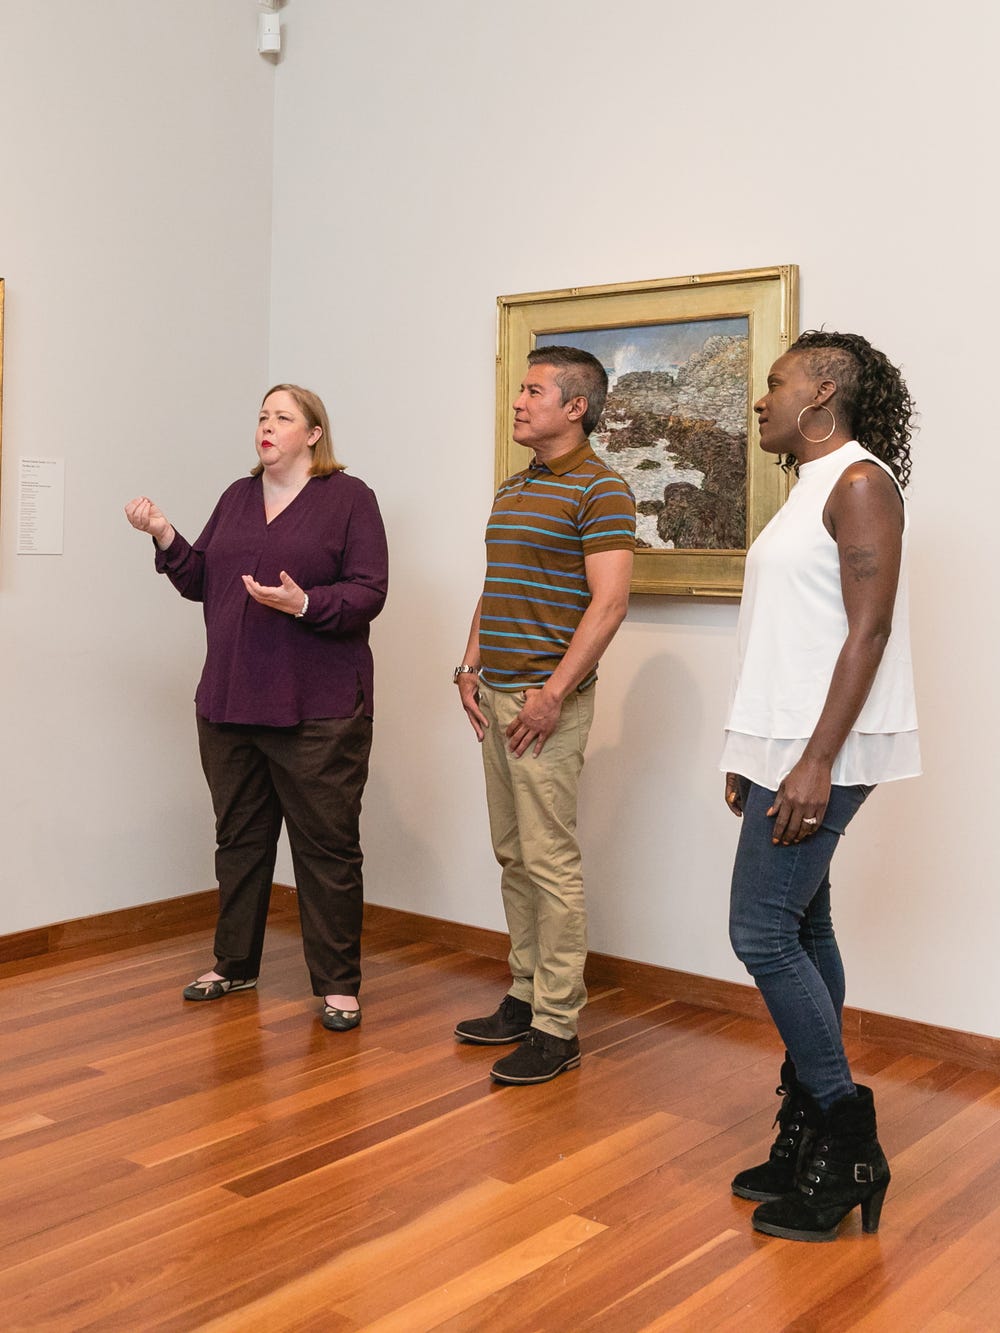 Five people looking at and discussing art in a gallery